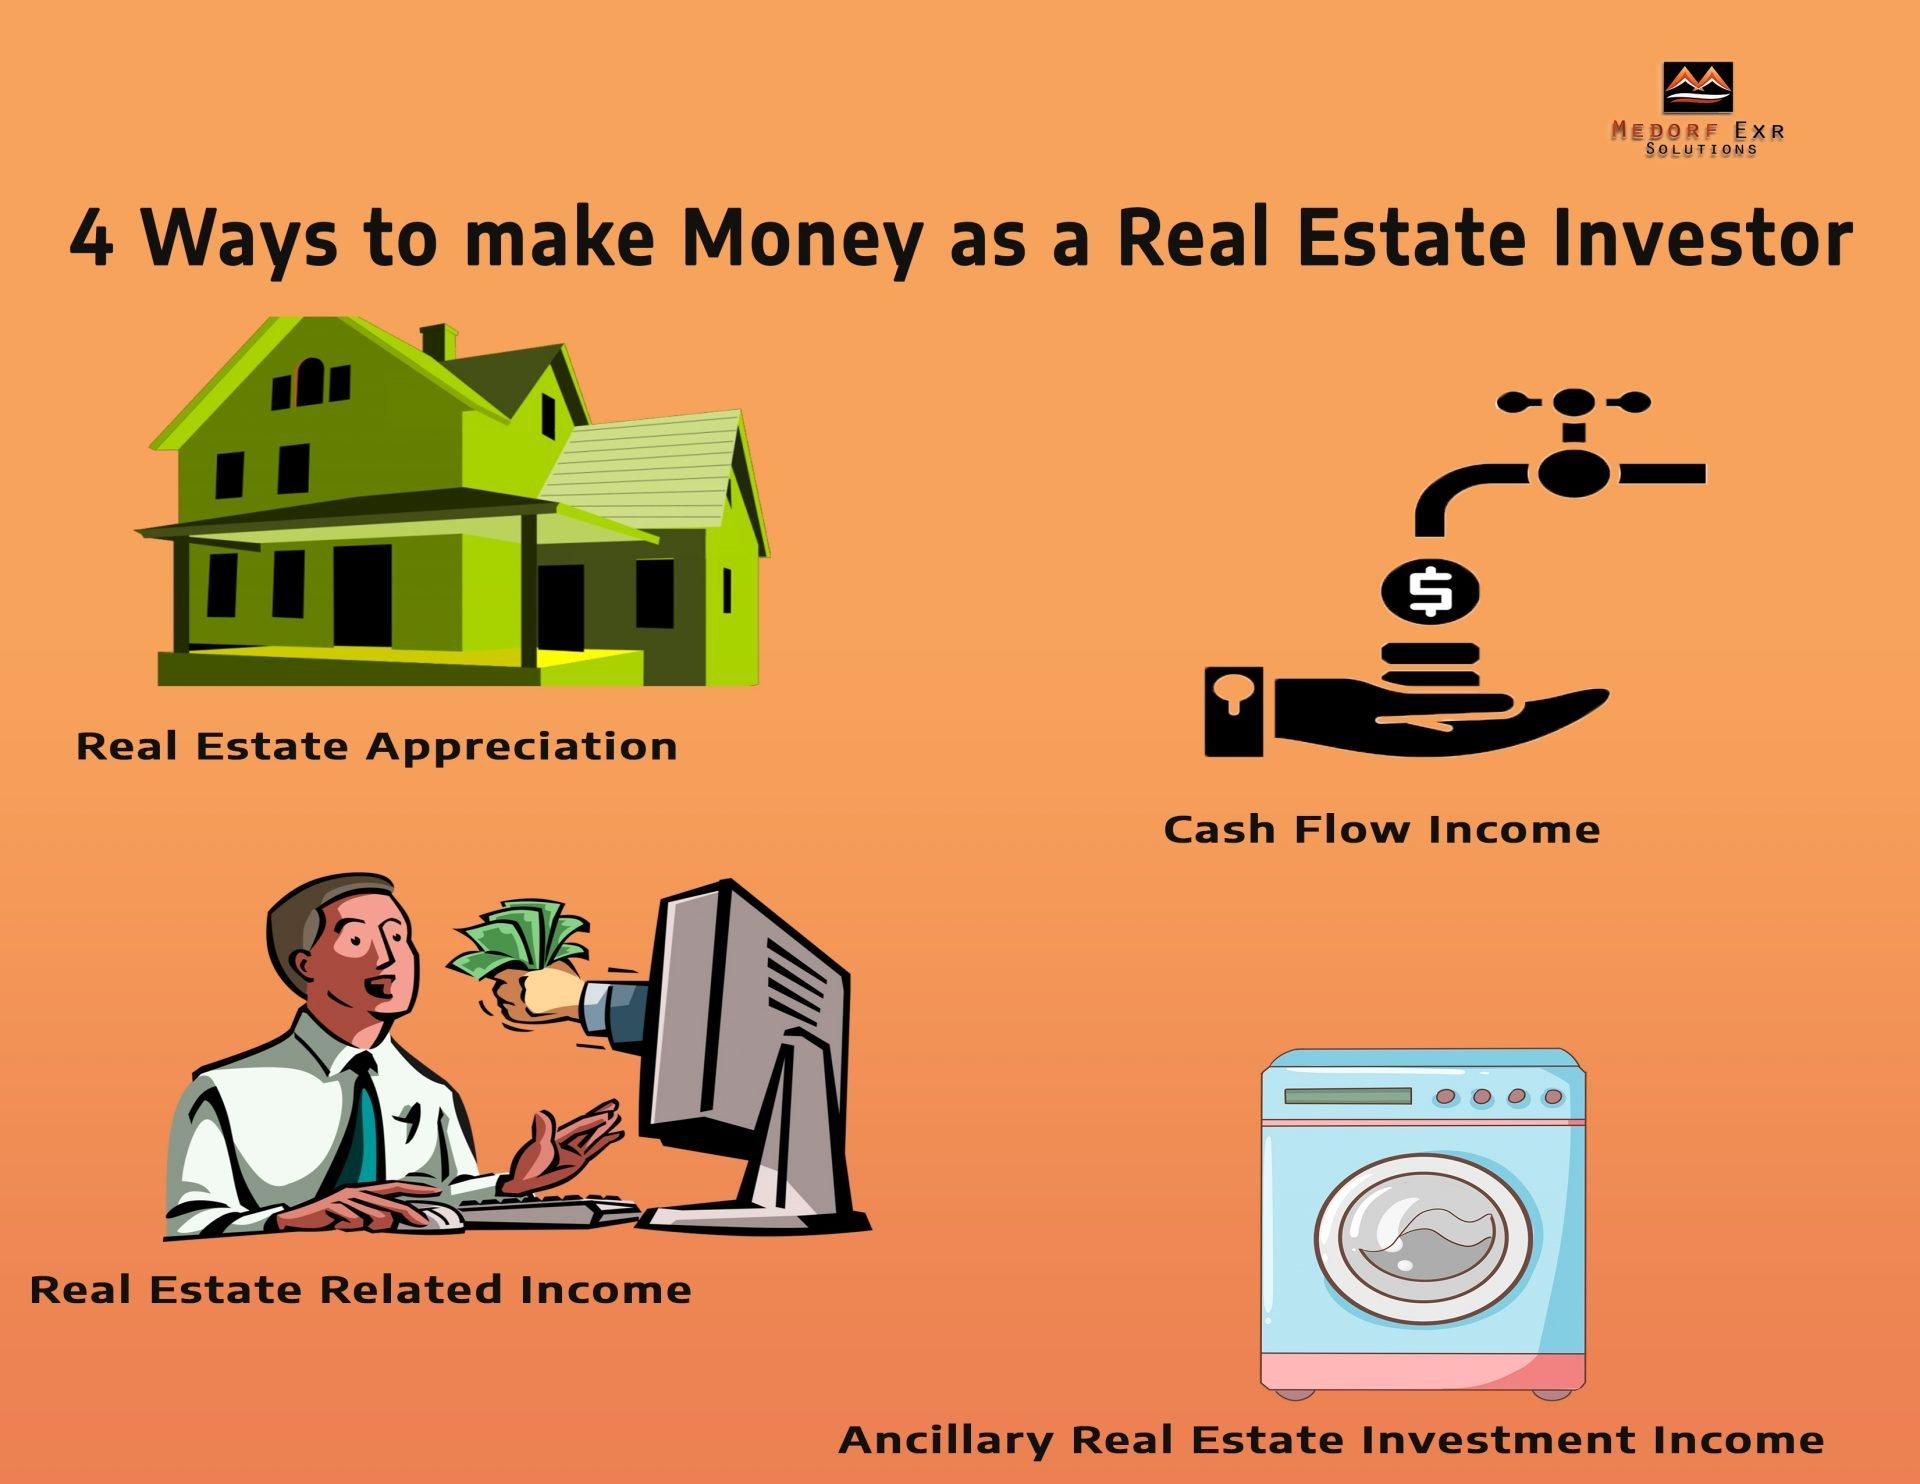 How to indirectly invest in real estate